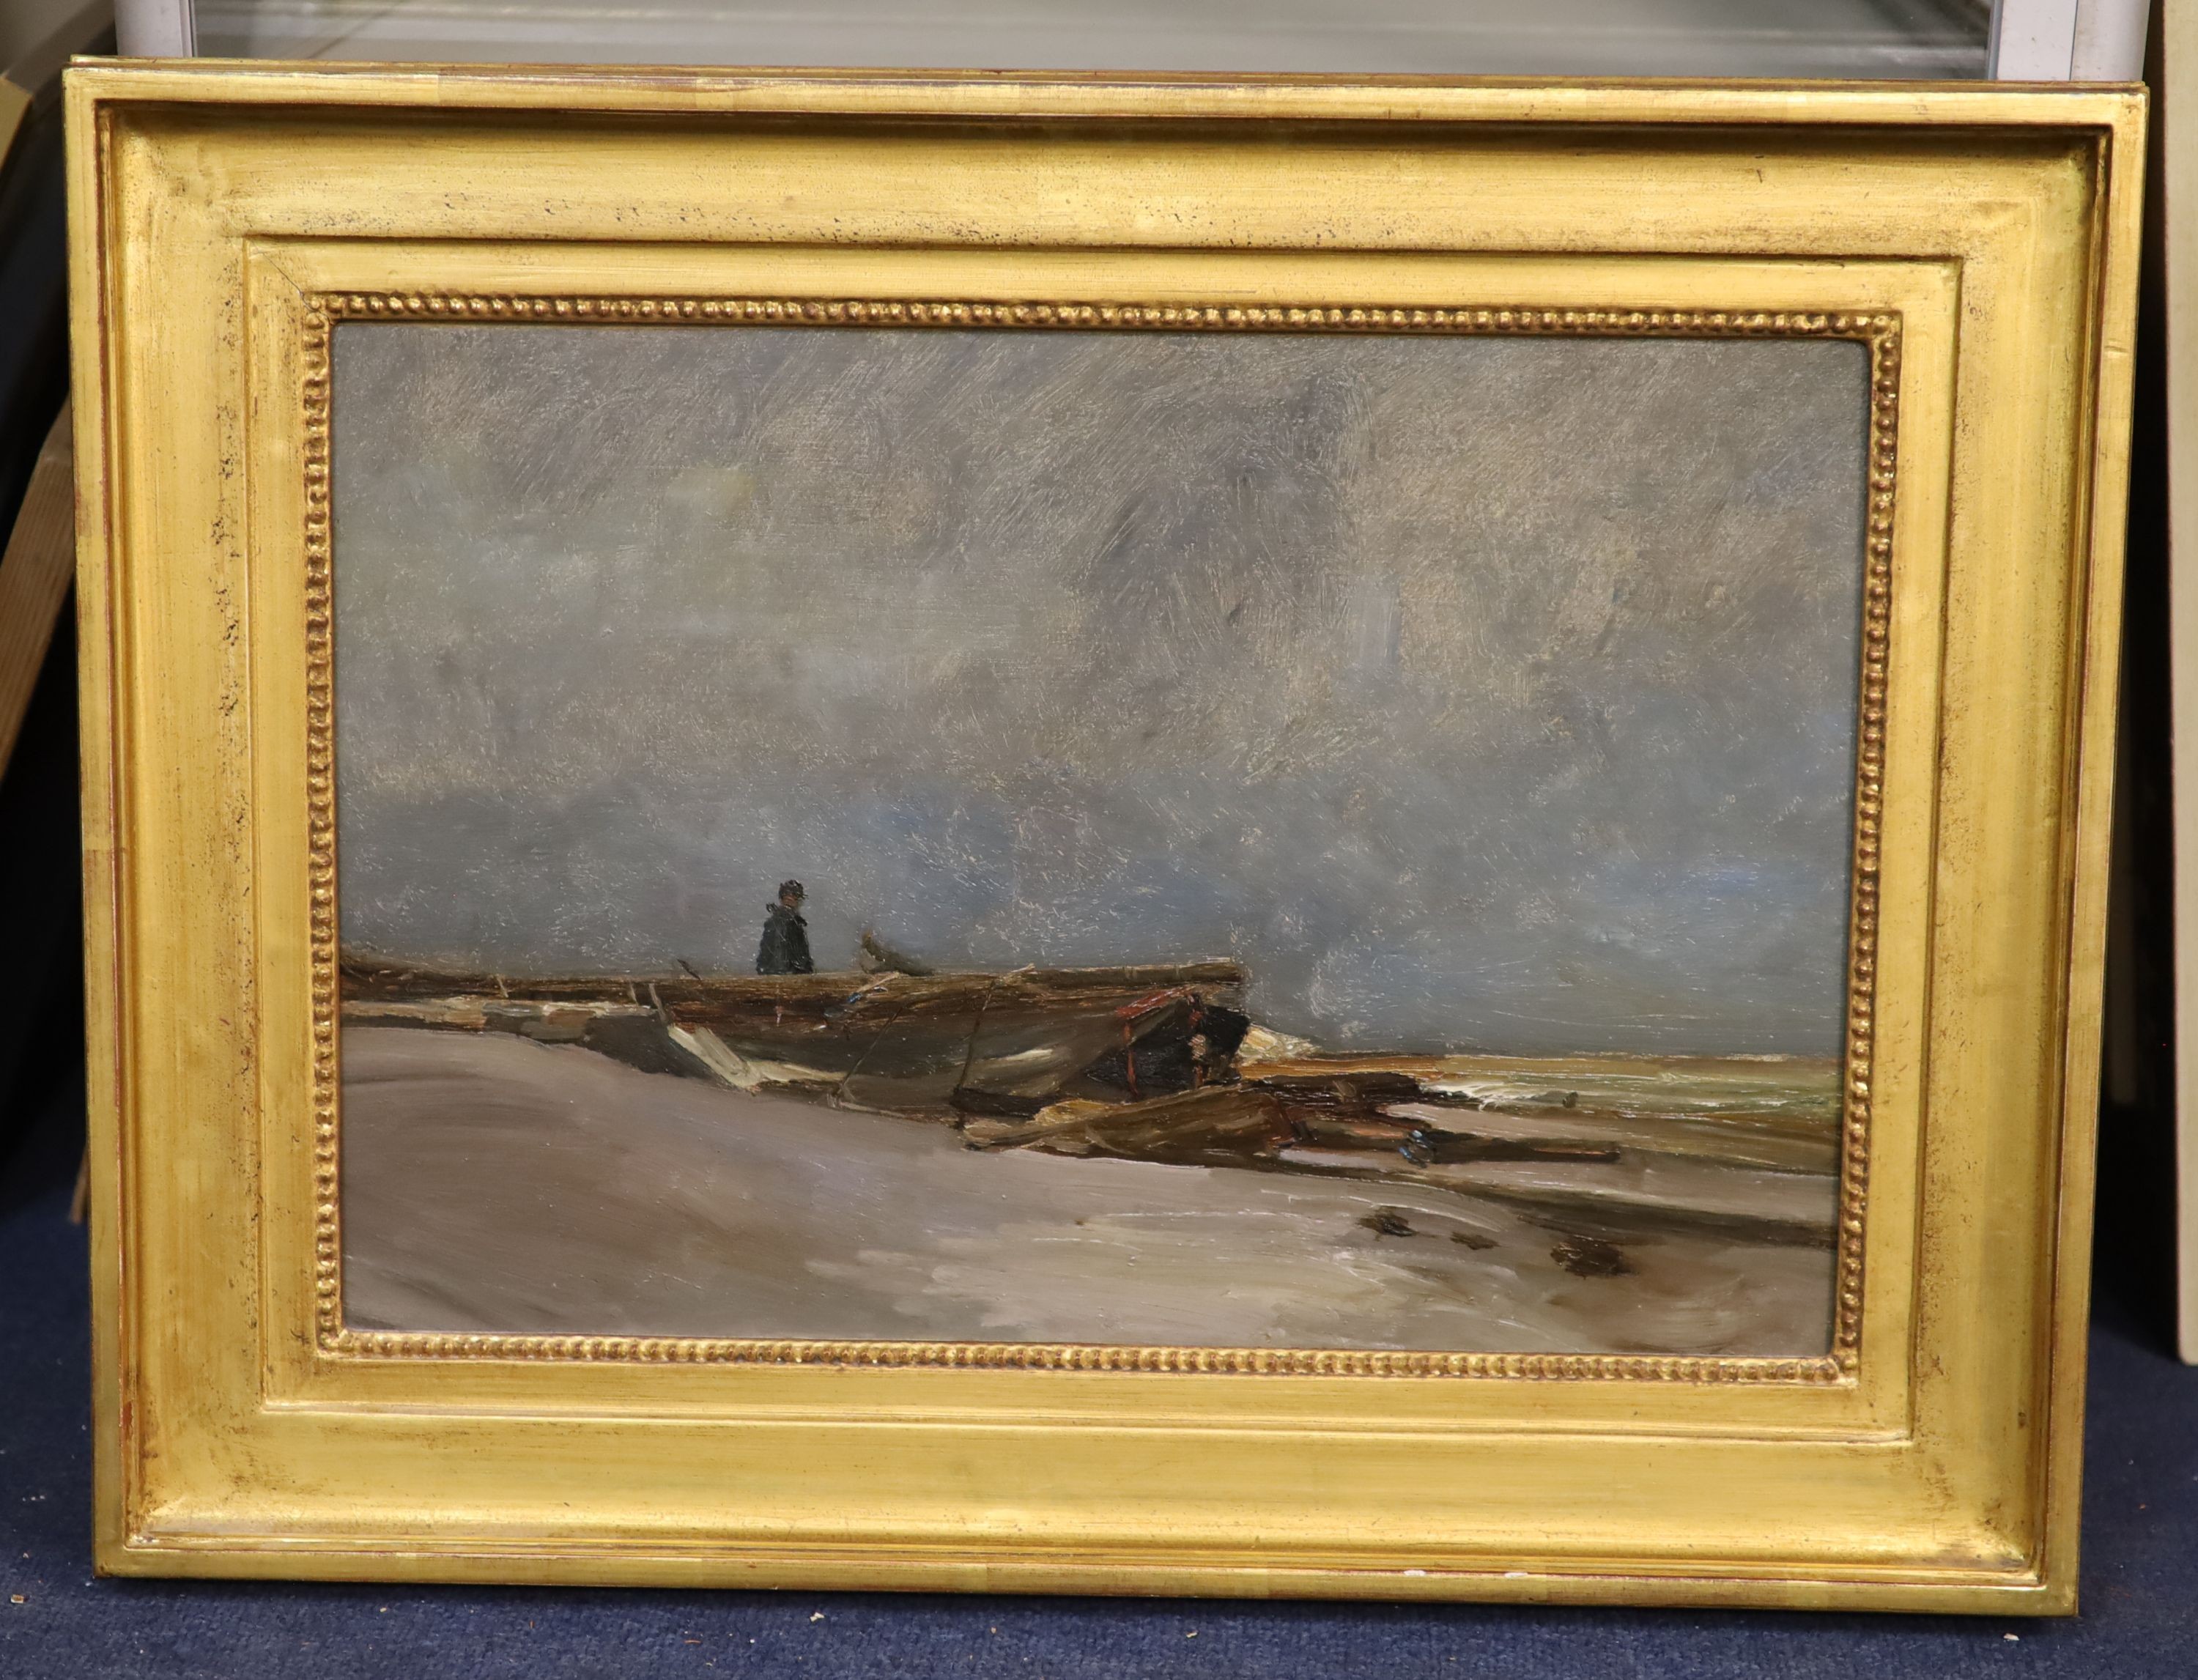 Gabriel Gruchy (1841-1926), Figure overlooking the shore, oil on canvas, 32 x 47cm.